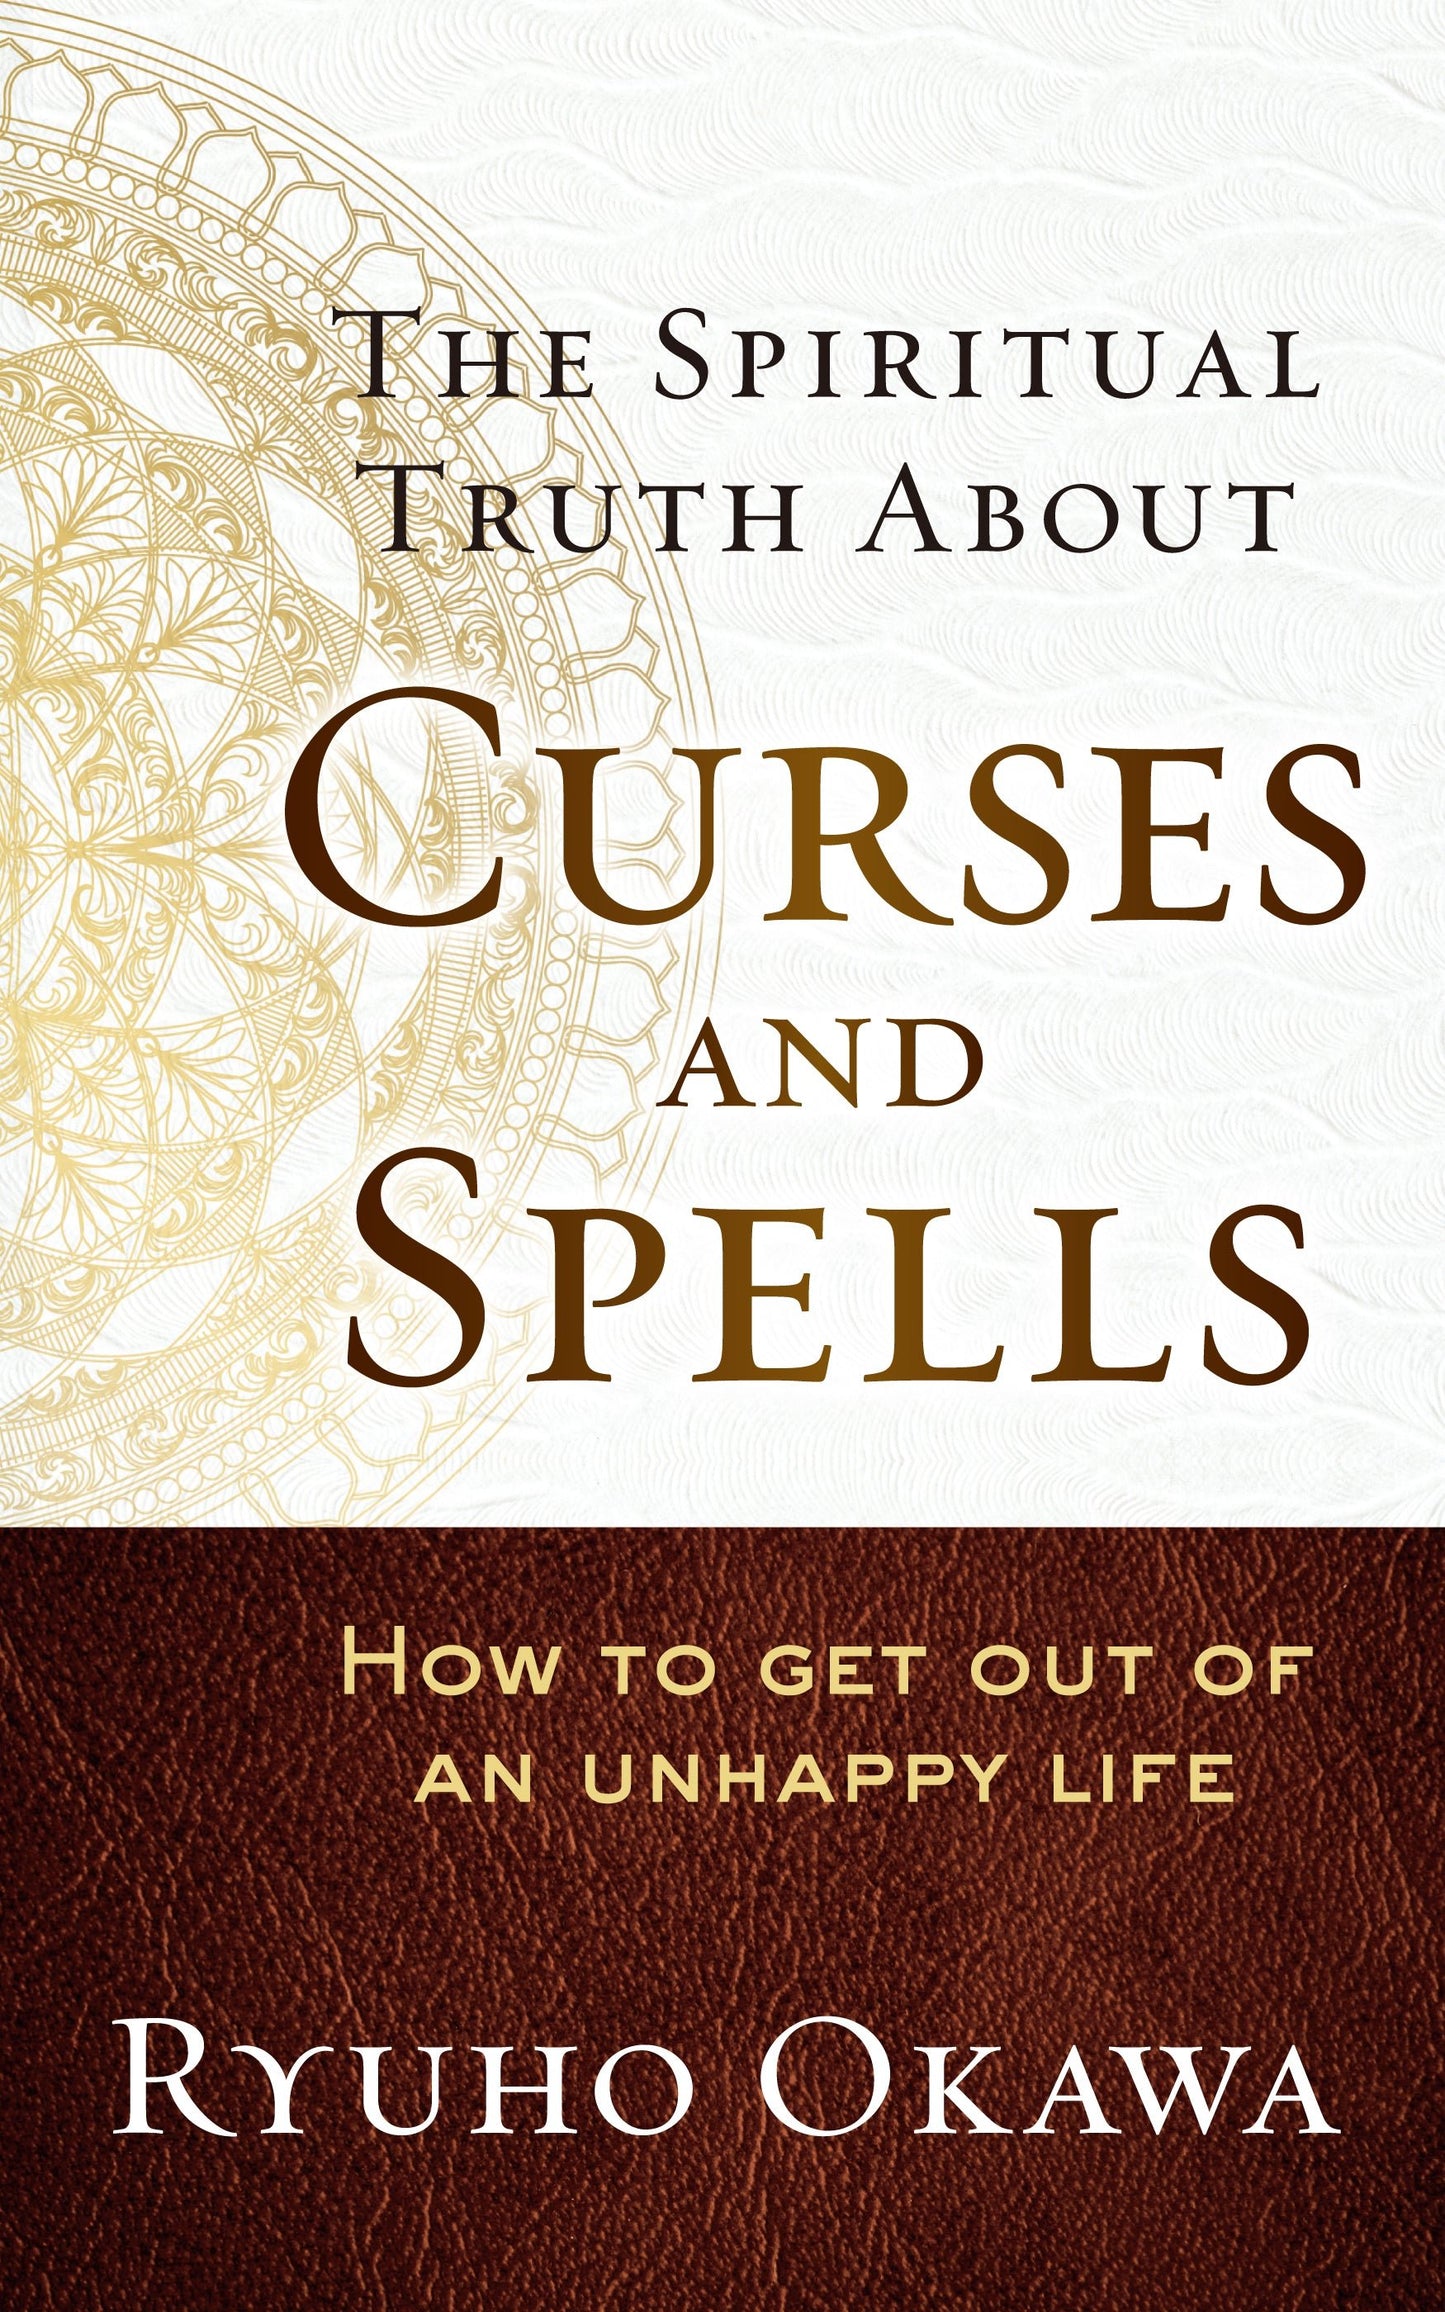 The Spiritual Truth About Curses and Spells : How to Get Out of an Unhappy Life, Ryuho Okawa, English - IRH Press International